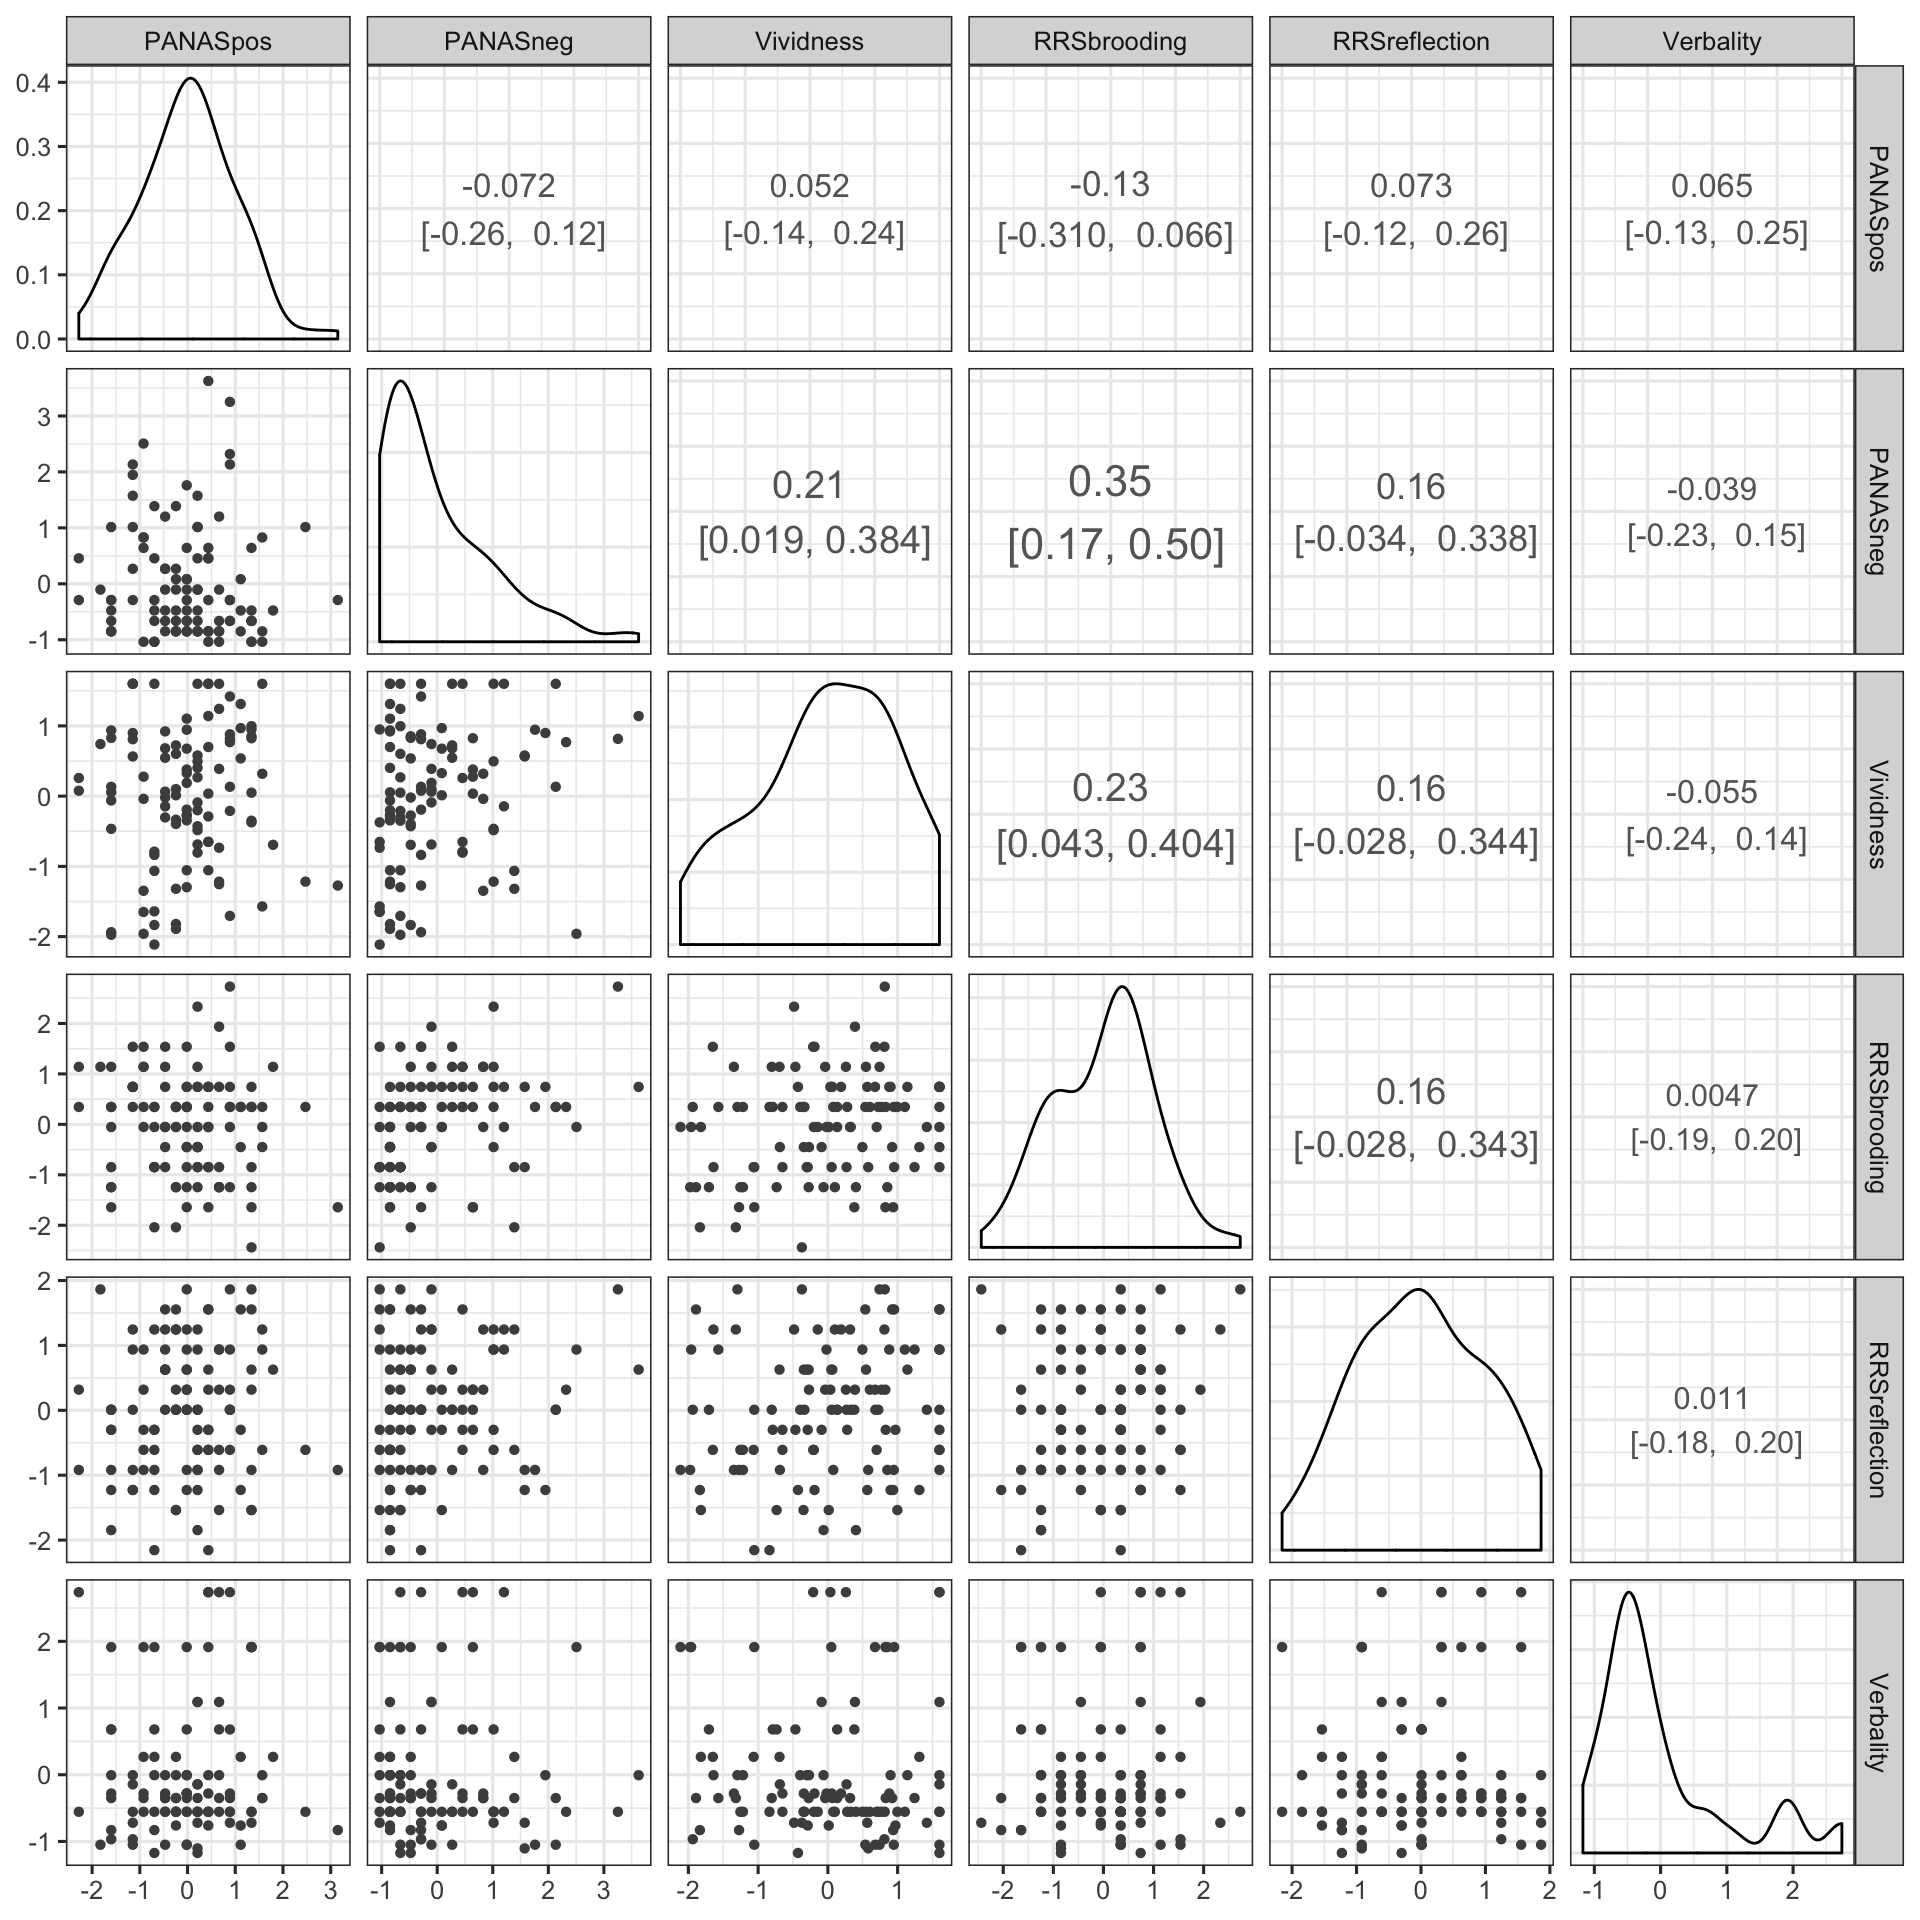 Diagonal: marginal distribution of each variable. Panels above the diagonal: Pearson's correlations between main continuous predictors, along with 95\% CIs. The absolute size of the correlation coefficient is represented by the size of the text (lower coefficients appear as smaller). Panels below the diagonal: scatterplot of each variables pair.